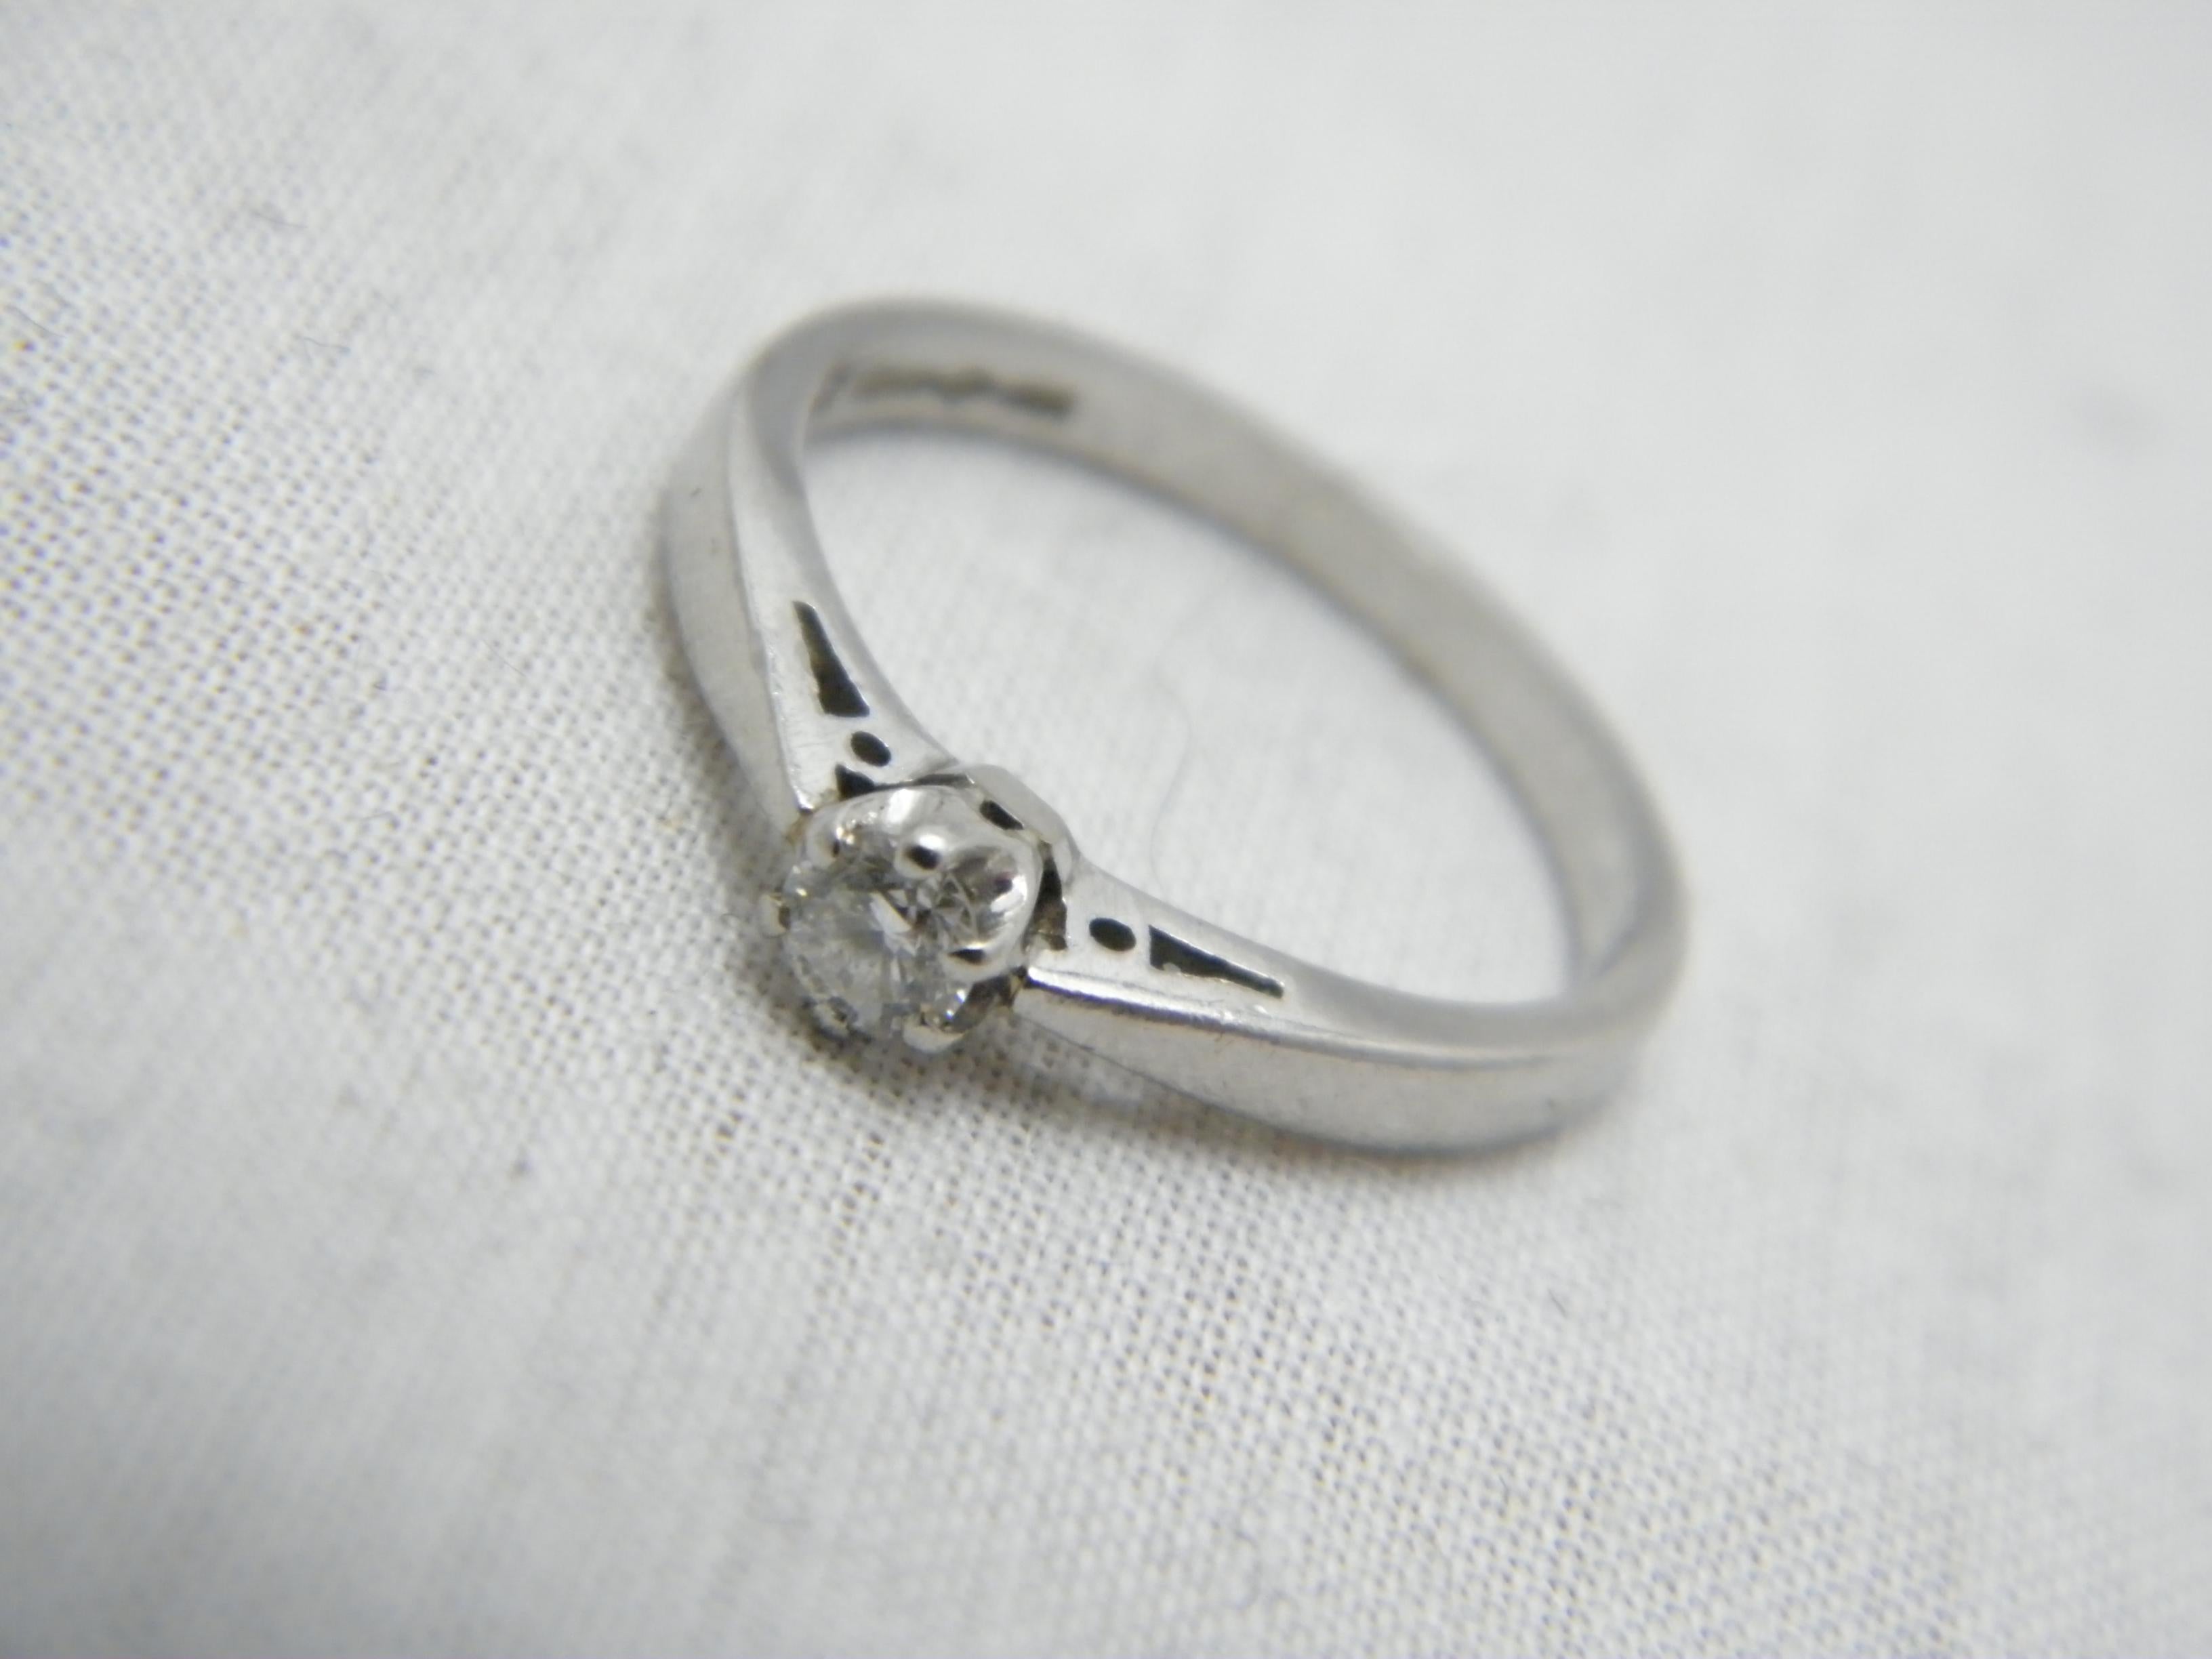 If you have landed on this page then you have an eye for beauty.

On offer is this gorgeous
950 PALLADIUM DIAMOND SOLITAIRE ENGAGEMENT BAND RING

DETAILS
Material: 950/1000 Palladium
Style: Classic single stone solitaire.
The ring has a very thick